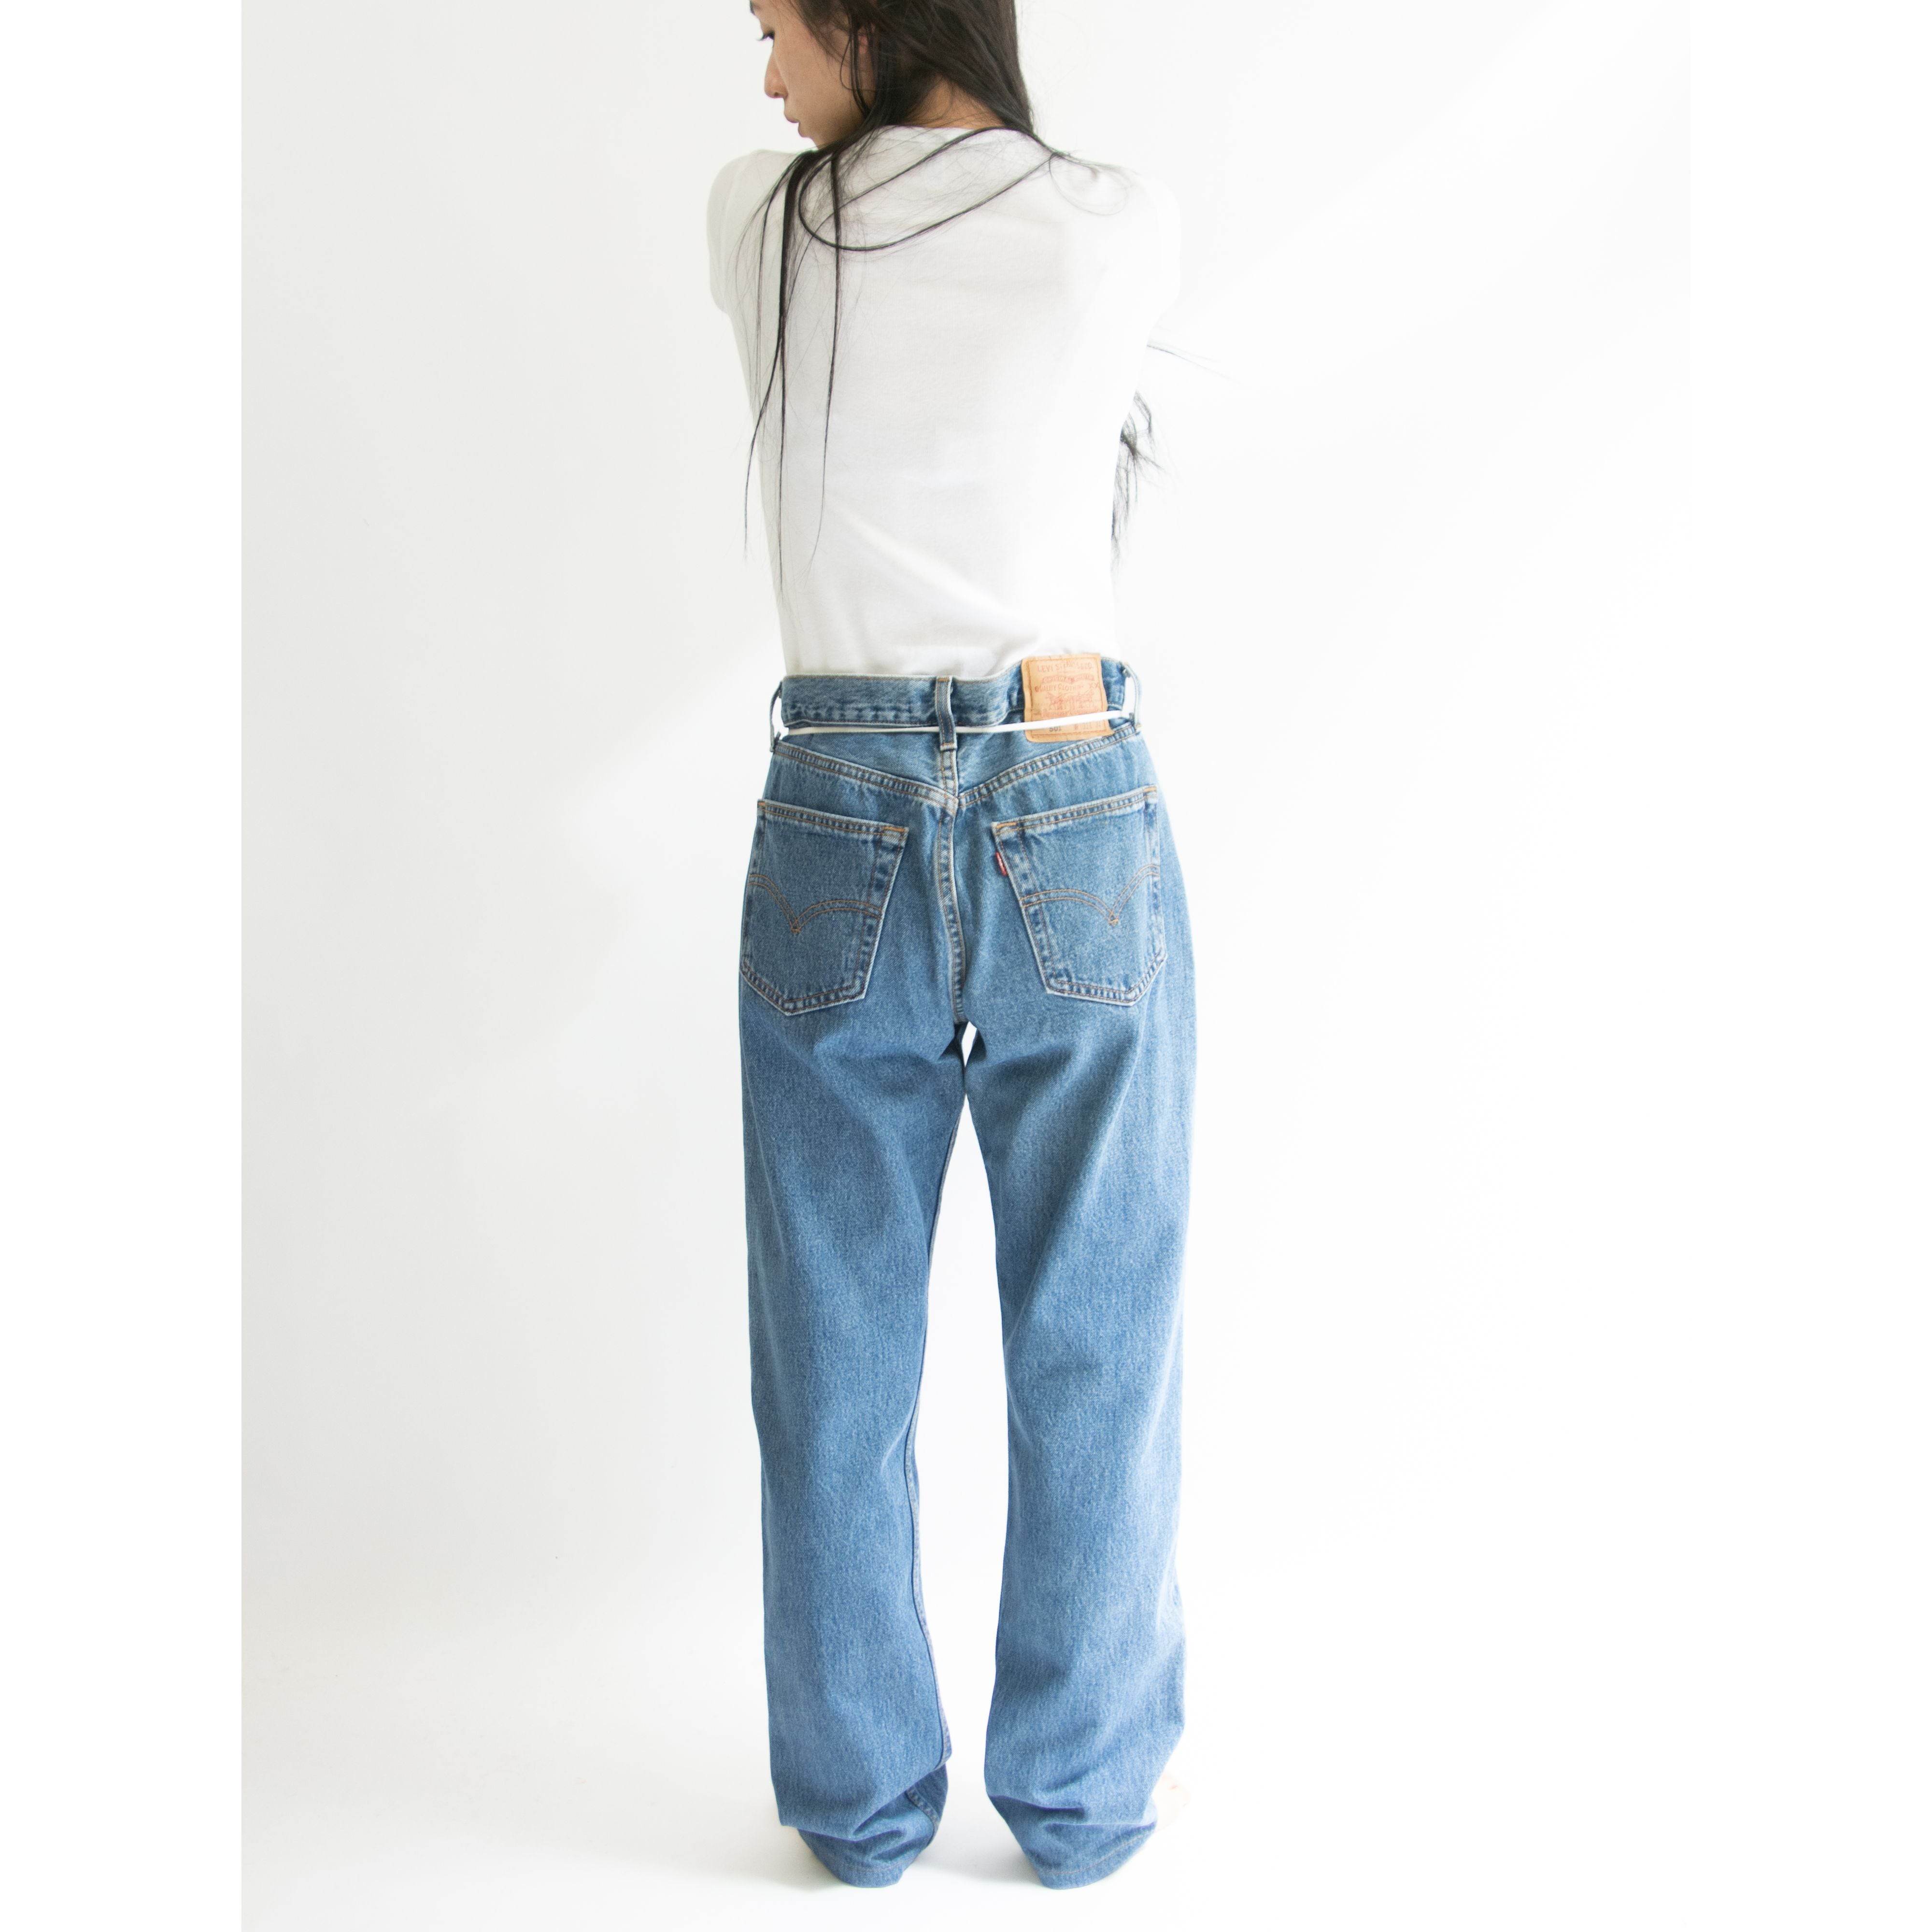 【LEVI'S 501 FOR WOMEN】Made in U.S.A. 90's Straight Denim Pants W31  L34（リーバイス アメリカ製 ストレートデニムパンツ ジーンズ） | MASCOT/E powered by BASE